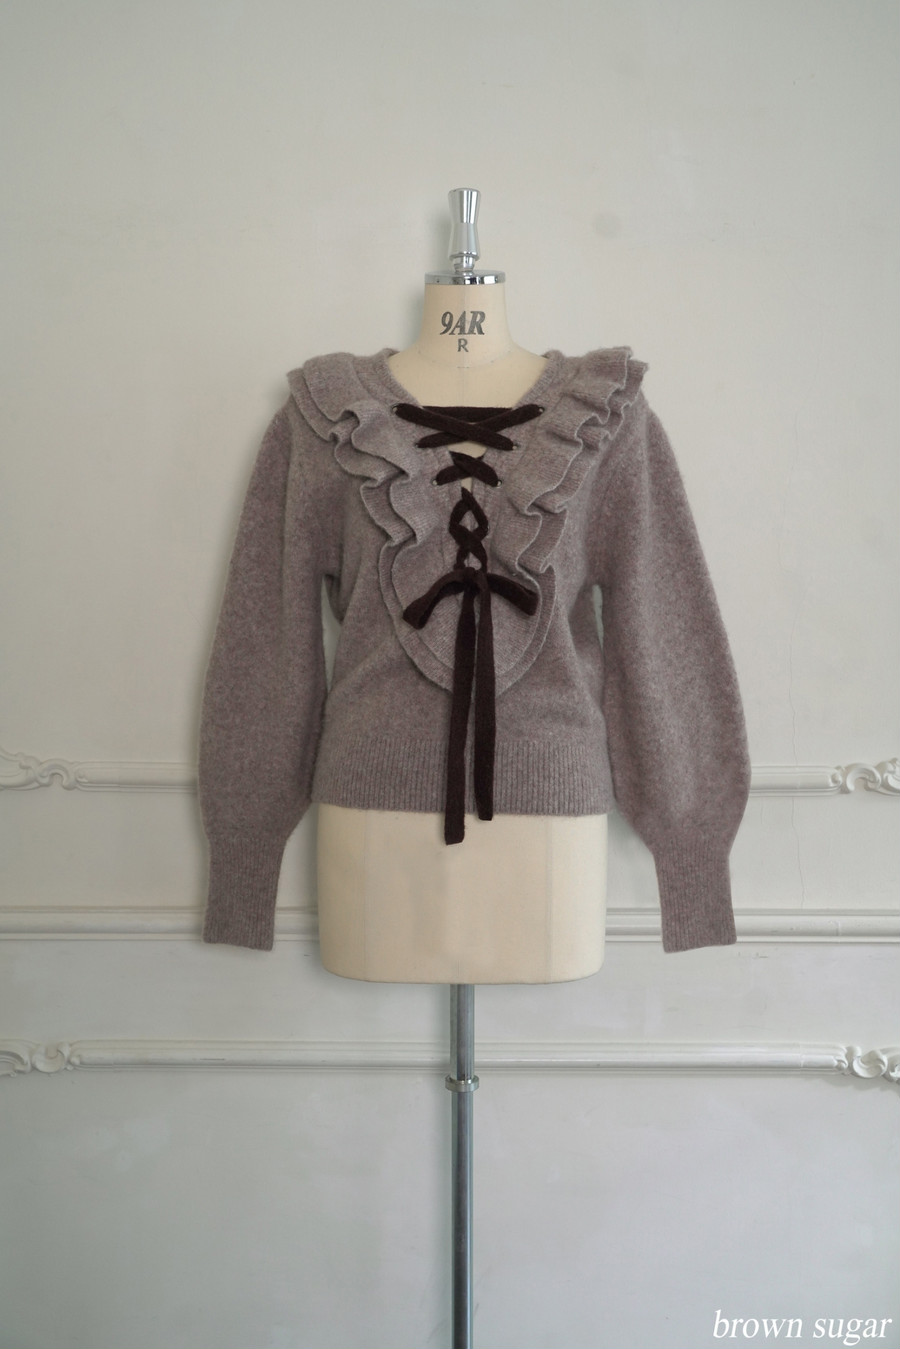 ＊＊＊＊＊＊＊＊＊＊Lace Up Wool-blend Pullover